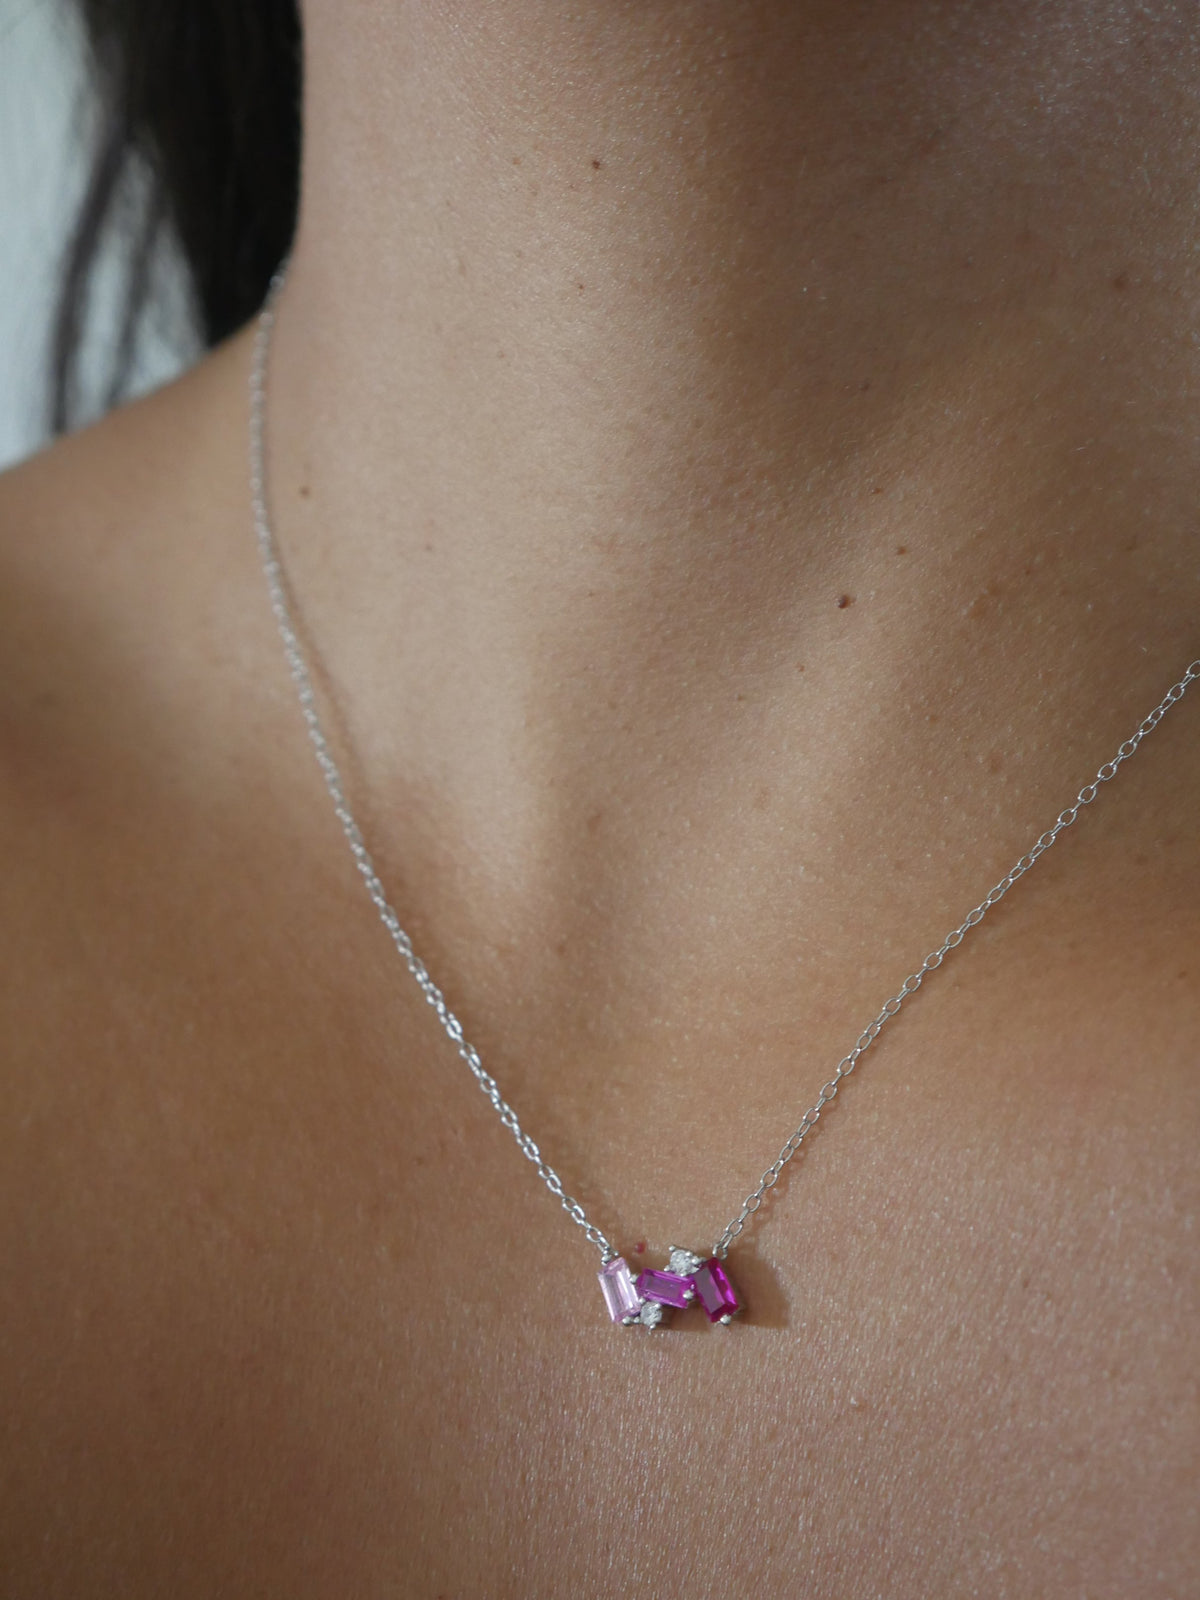 necklace, silver necklaces, 925 sterling silver necklaces, rhinestone necklaces, pink rhinestone necklaces, designer jewelry, fashion jewelry, birthday gifts, anniversary gifts, graduation gifts, holiday gifts, pink necklaces, pink diamond necklace, waterproof jewelry, hypoallergenic necklaces , dainty jewelry, affordable, jewelry cool necklaces, necklace ideas, tarnish free necklaces, nice necklace pink necklaces